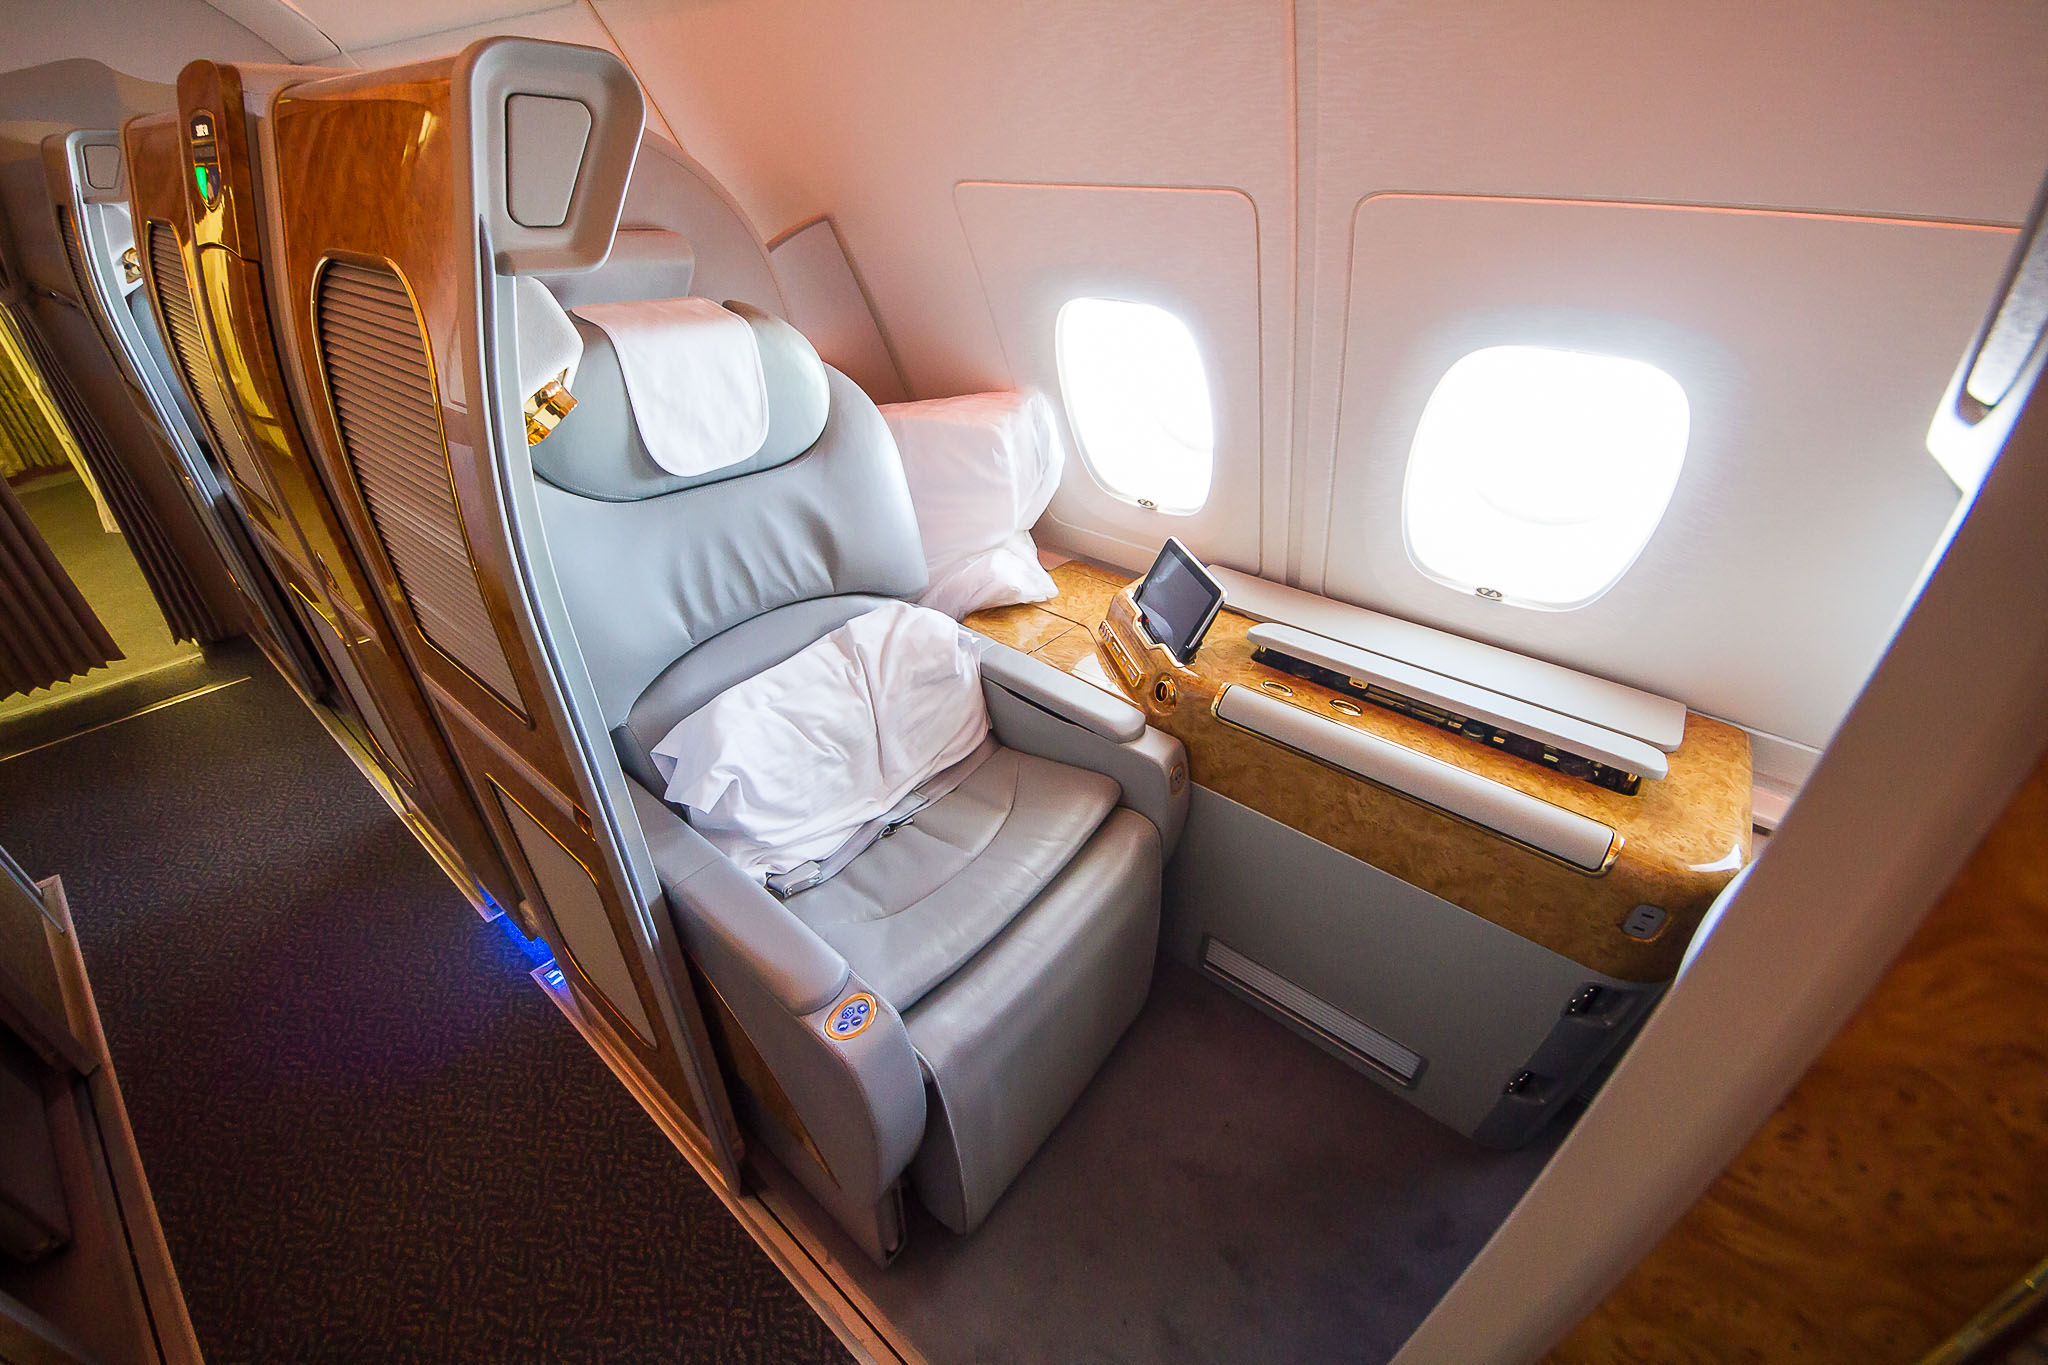 Emirates Airlines First Class